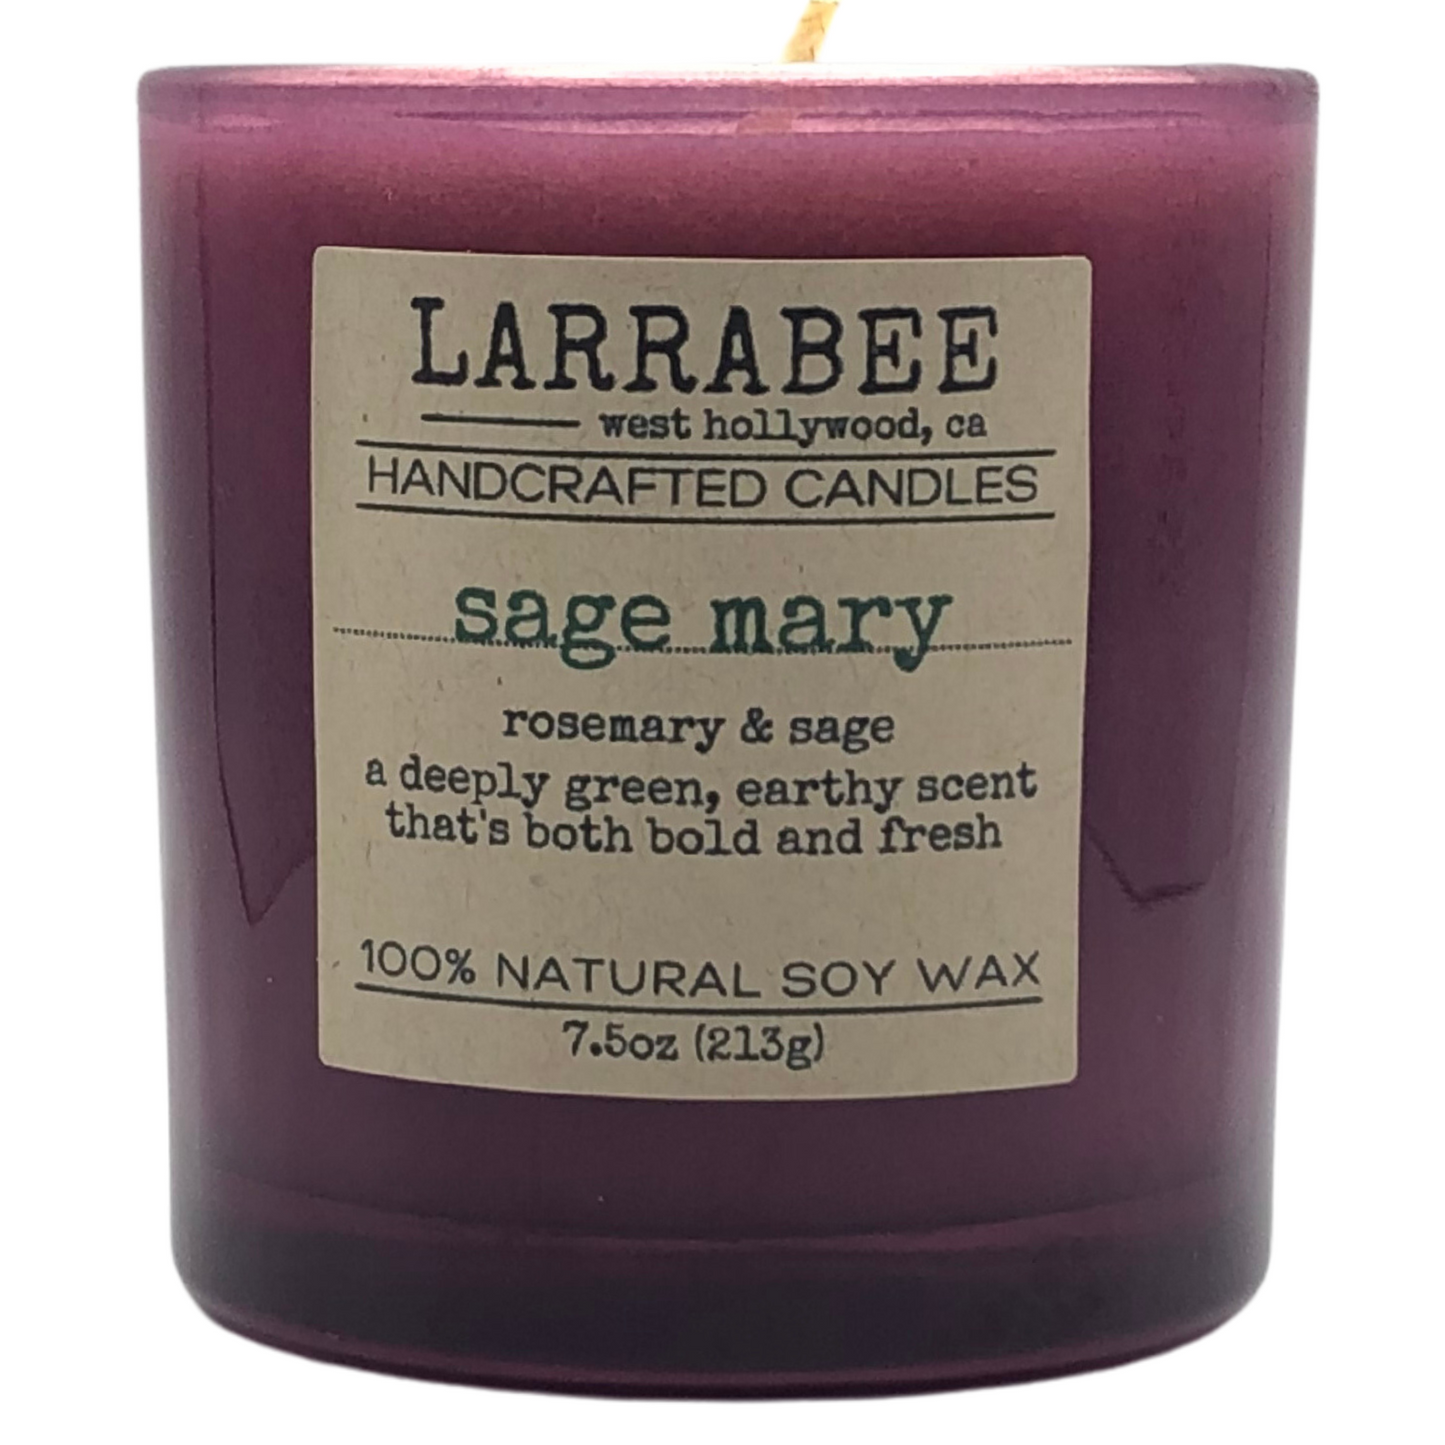 Sage 'Mary handcrafted candle